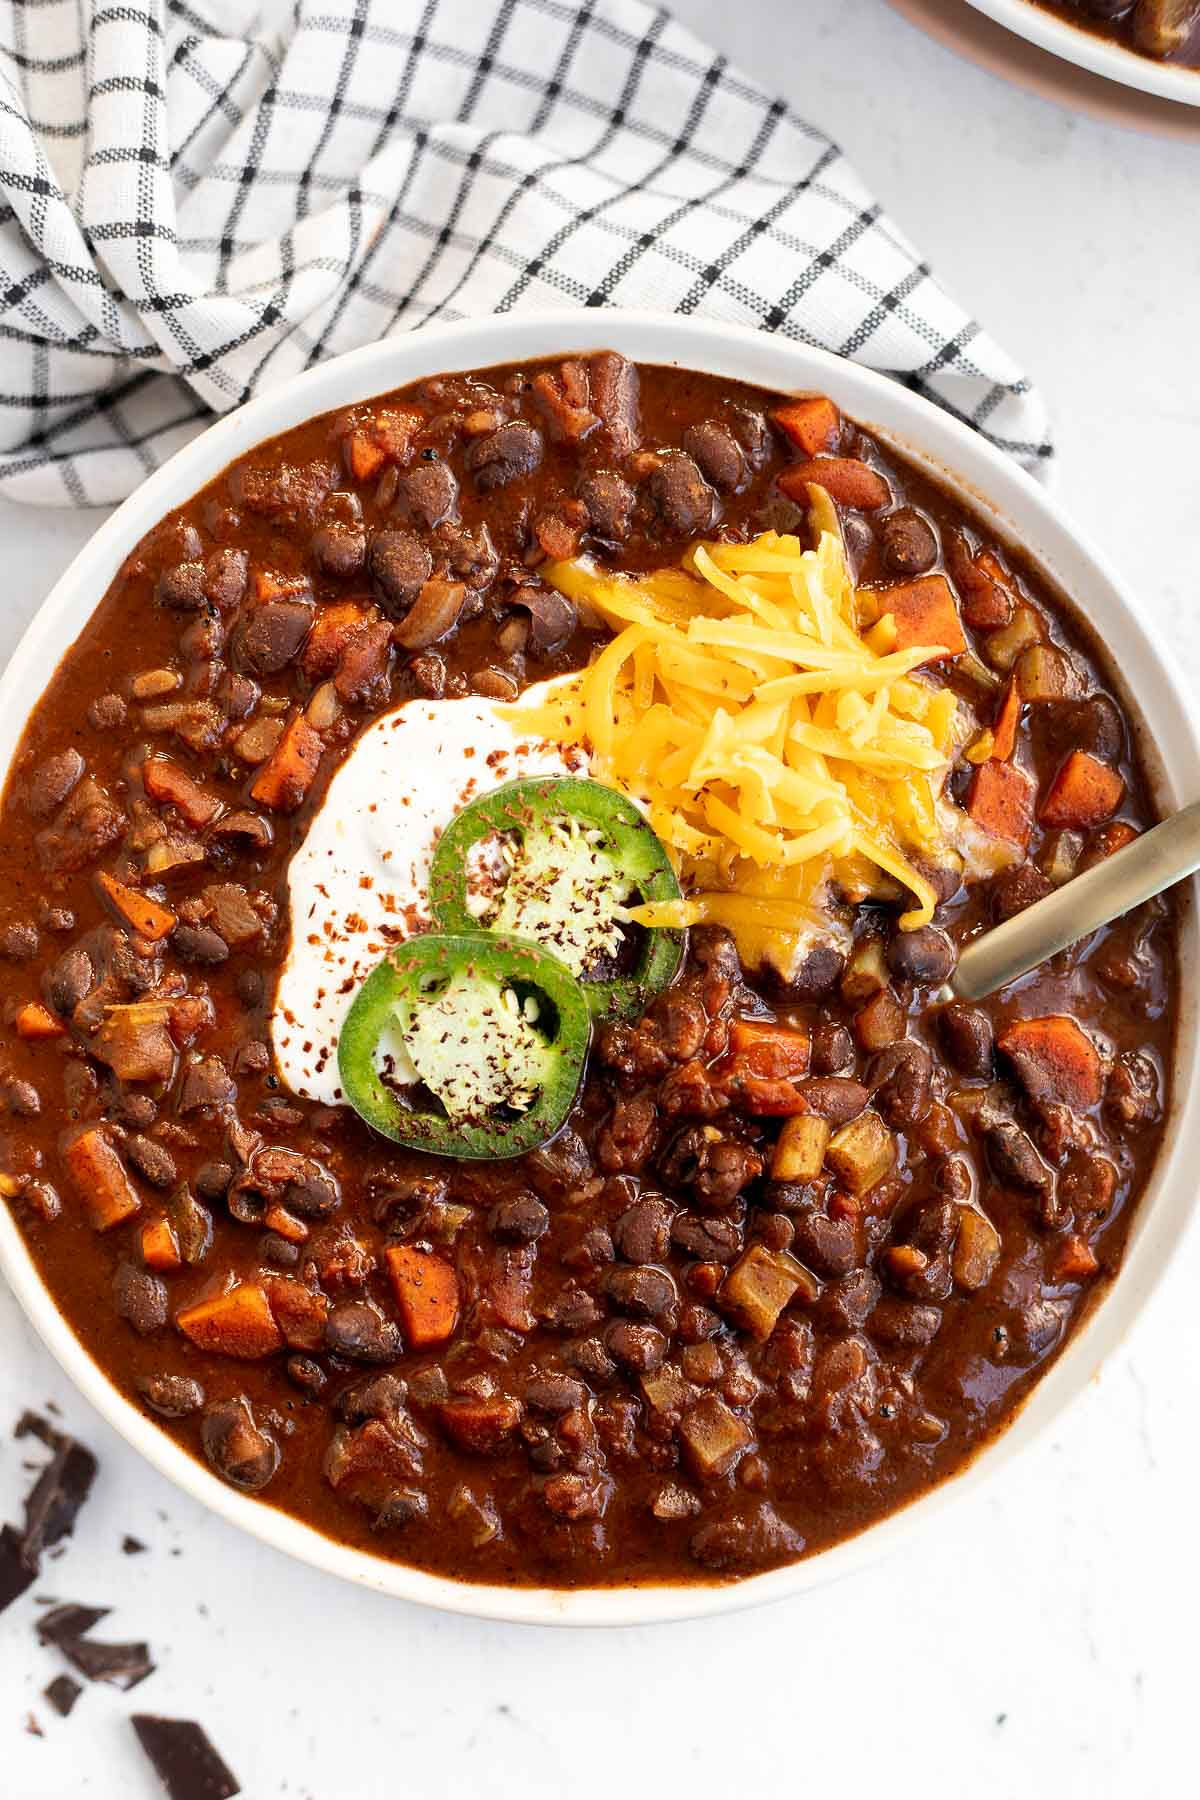 Black Bean Chili with Chocolate in a white bowl garnished with jalapeno slices, sour cream, and shredded cheddar, top view.